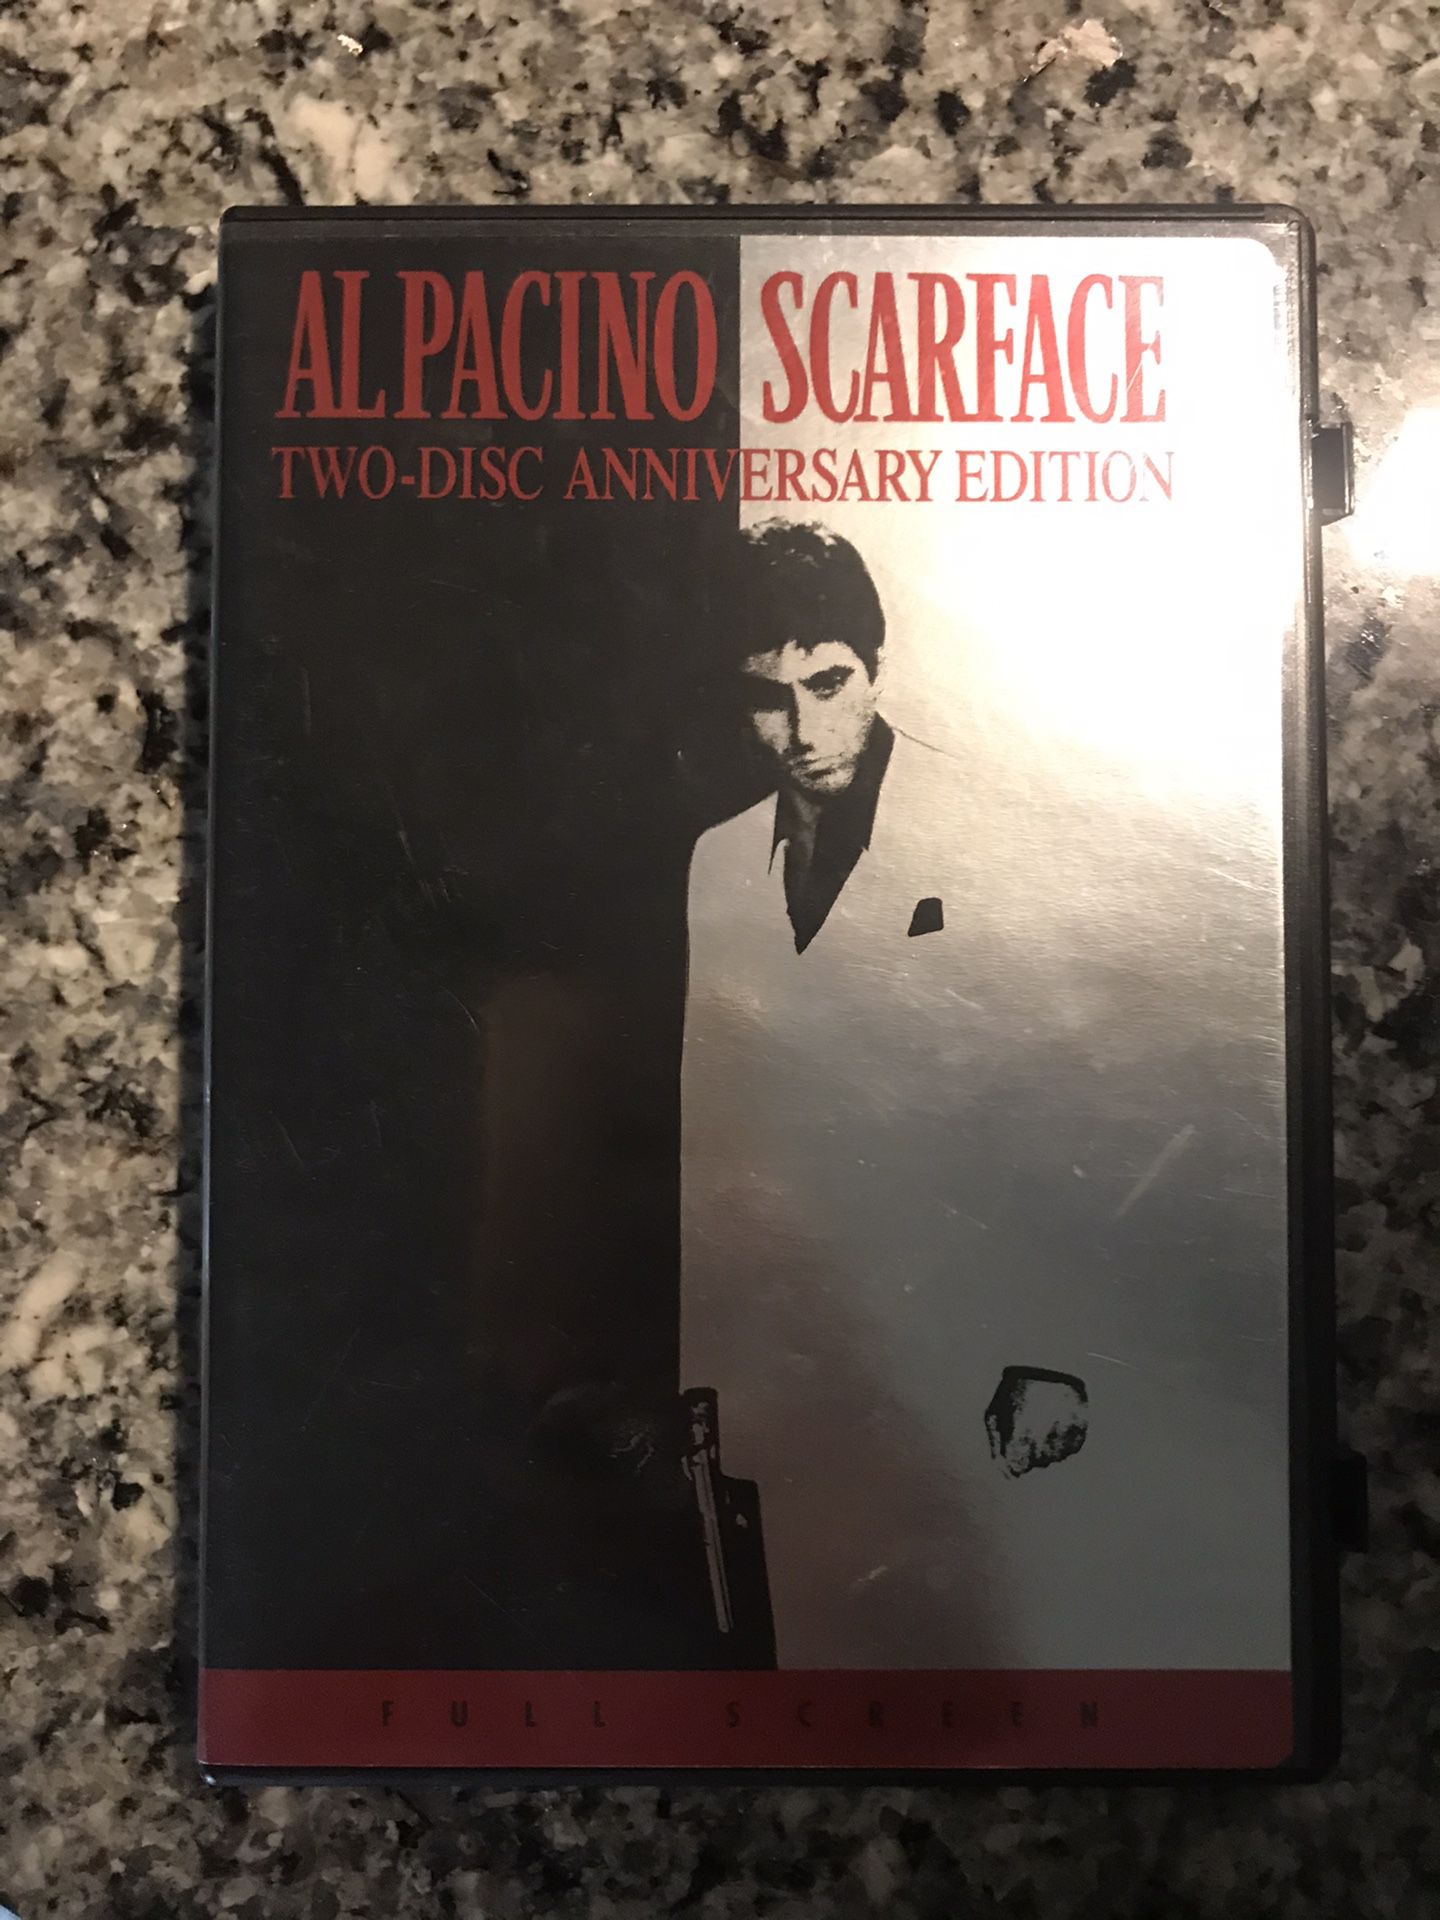 Scarface Anniversary sedition DVD